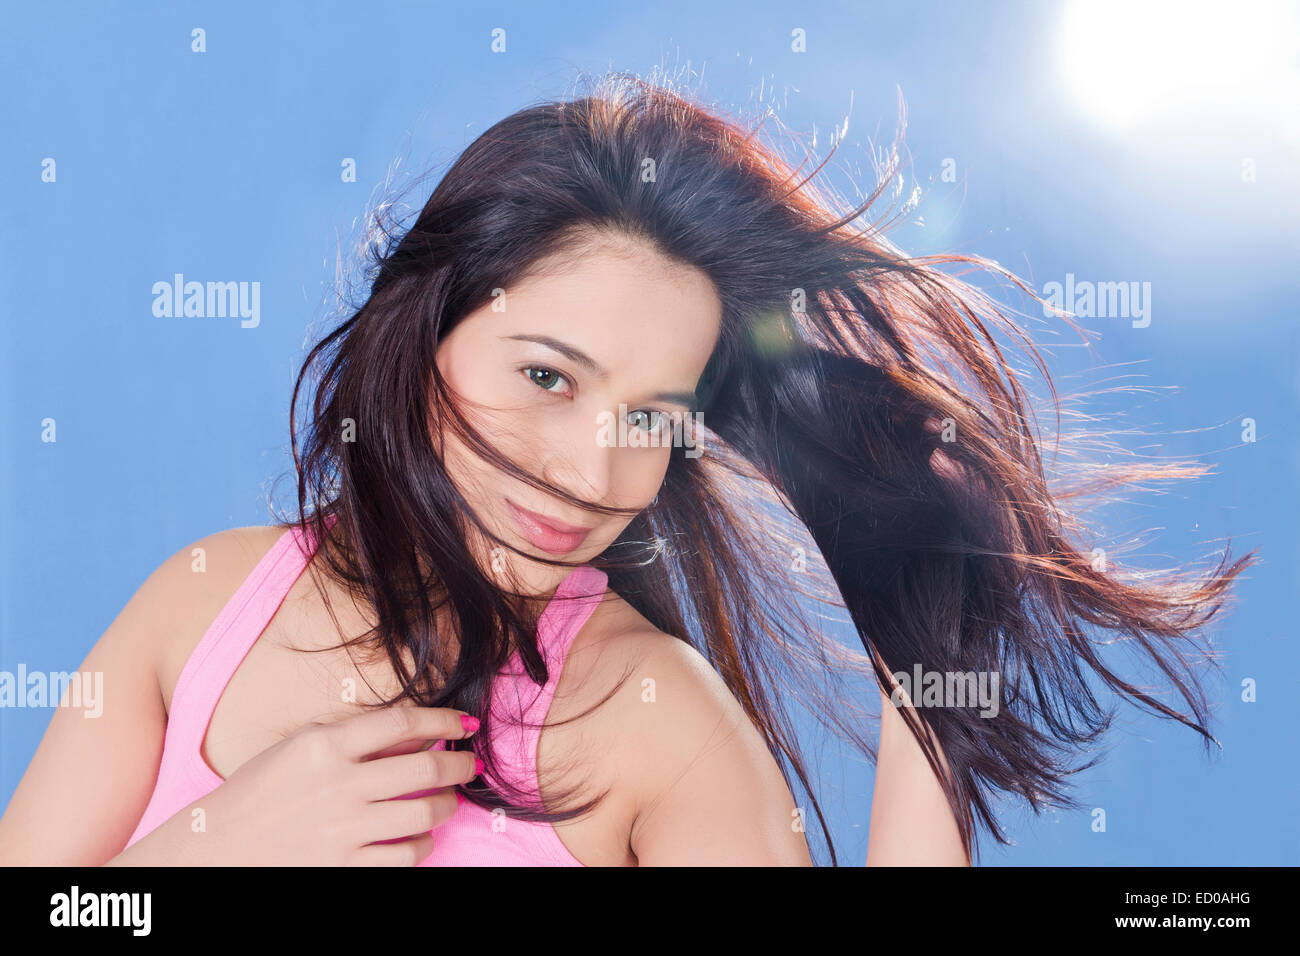 Indian Bellezza Donna glamour Foto Stock